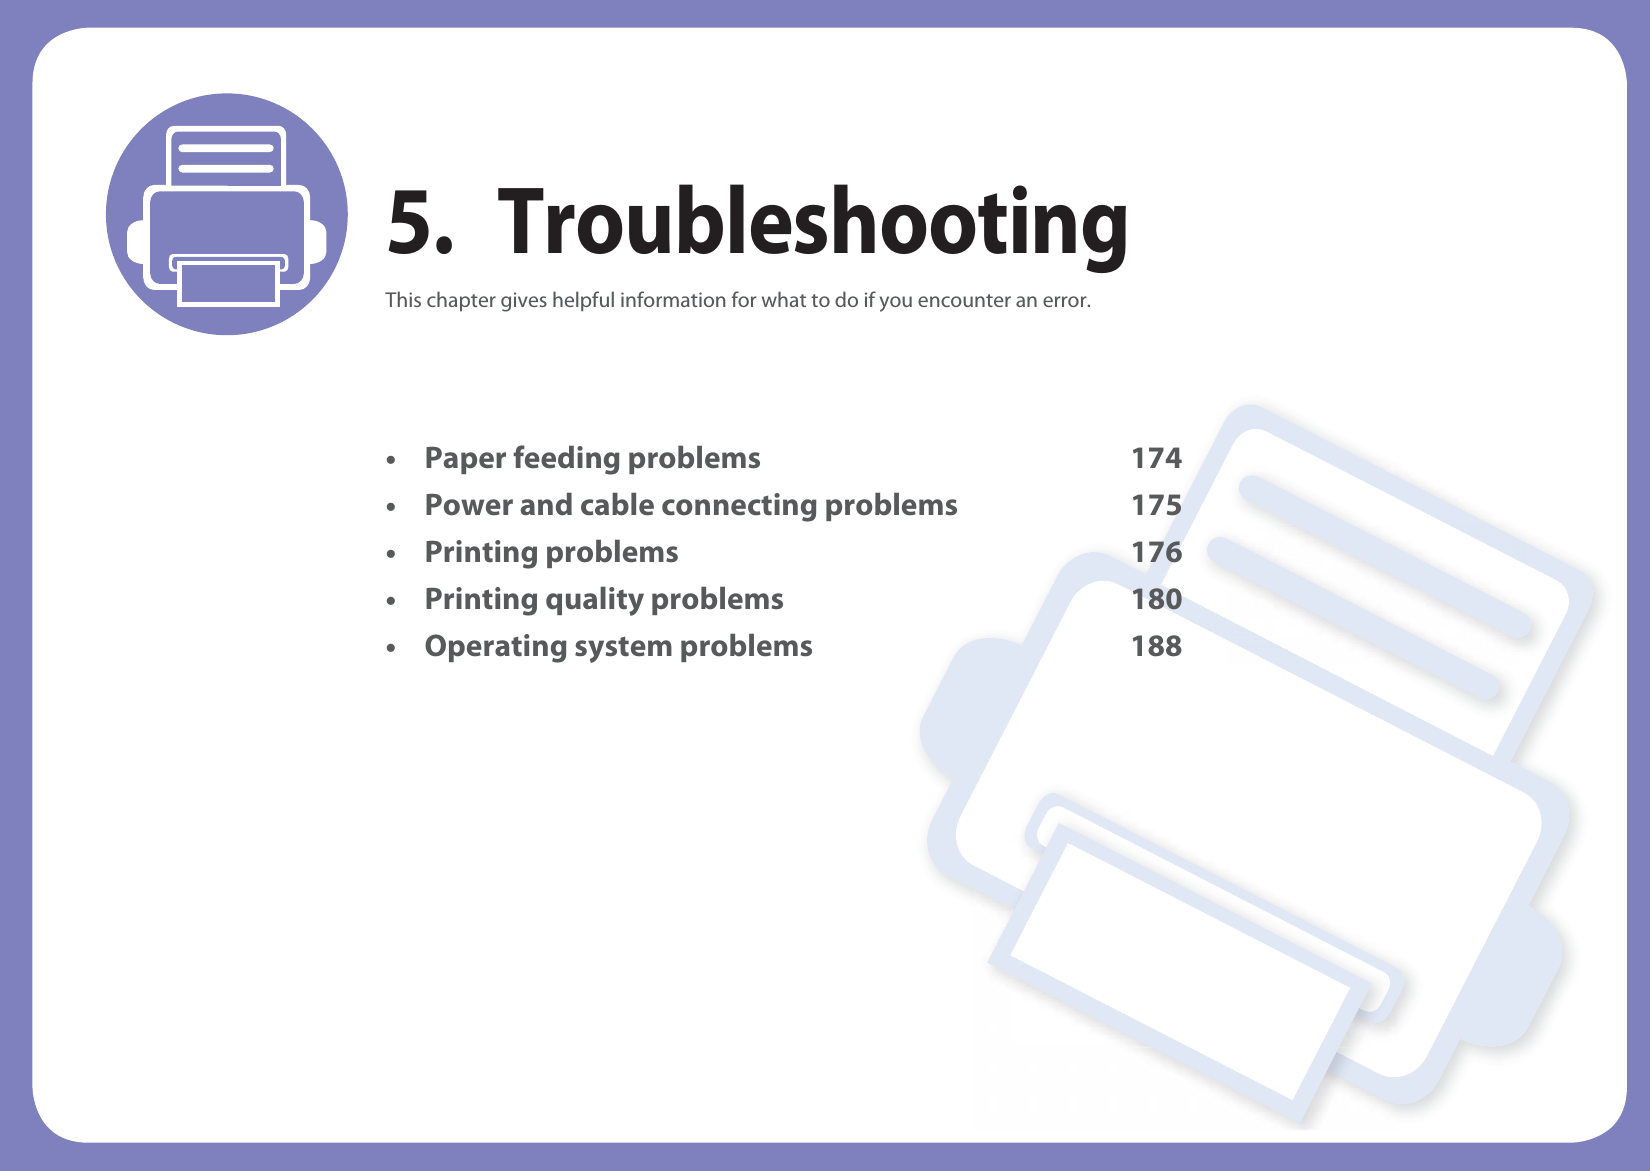 5. TroubleshootingThis chapter gives helpful information for what to do if you encounter an error.• Paper feeding problems 174• Power and cable connecting problems 175• Printing problems 176• Printing quality problems 180• Operating system problems 188